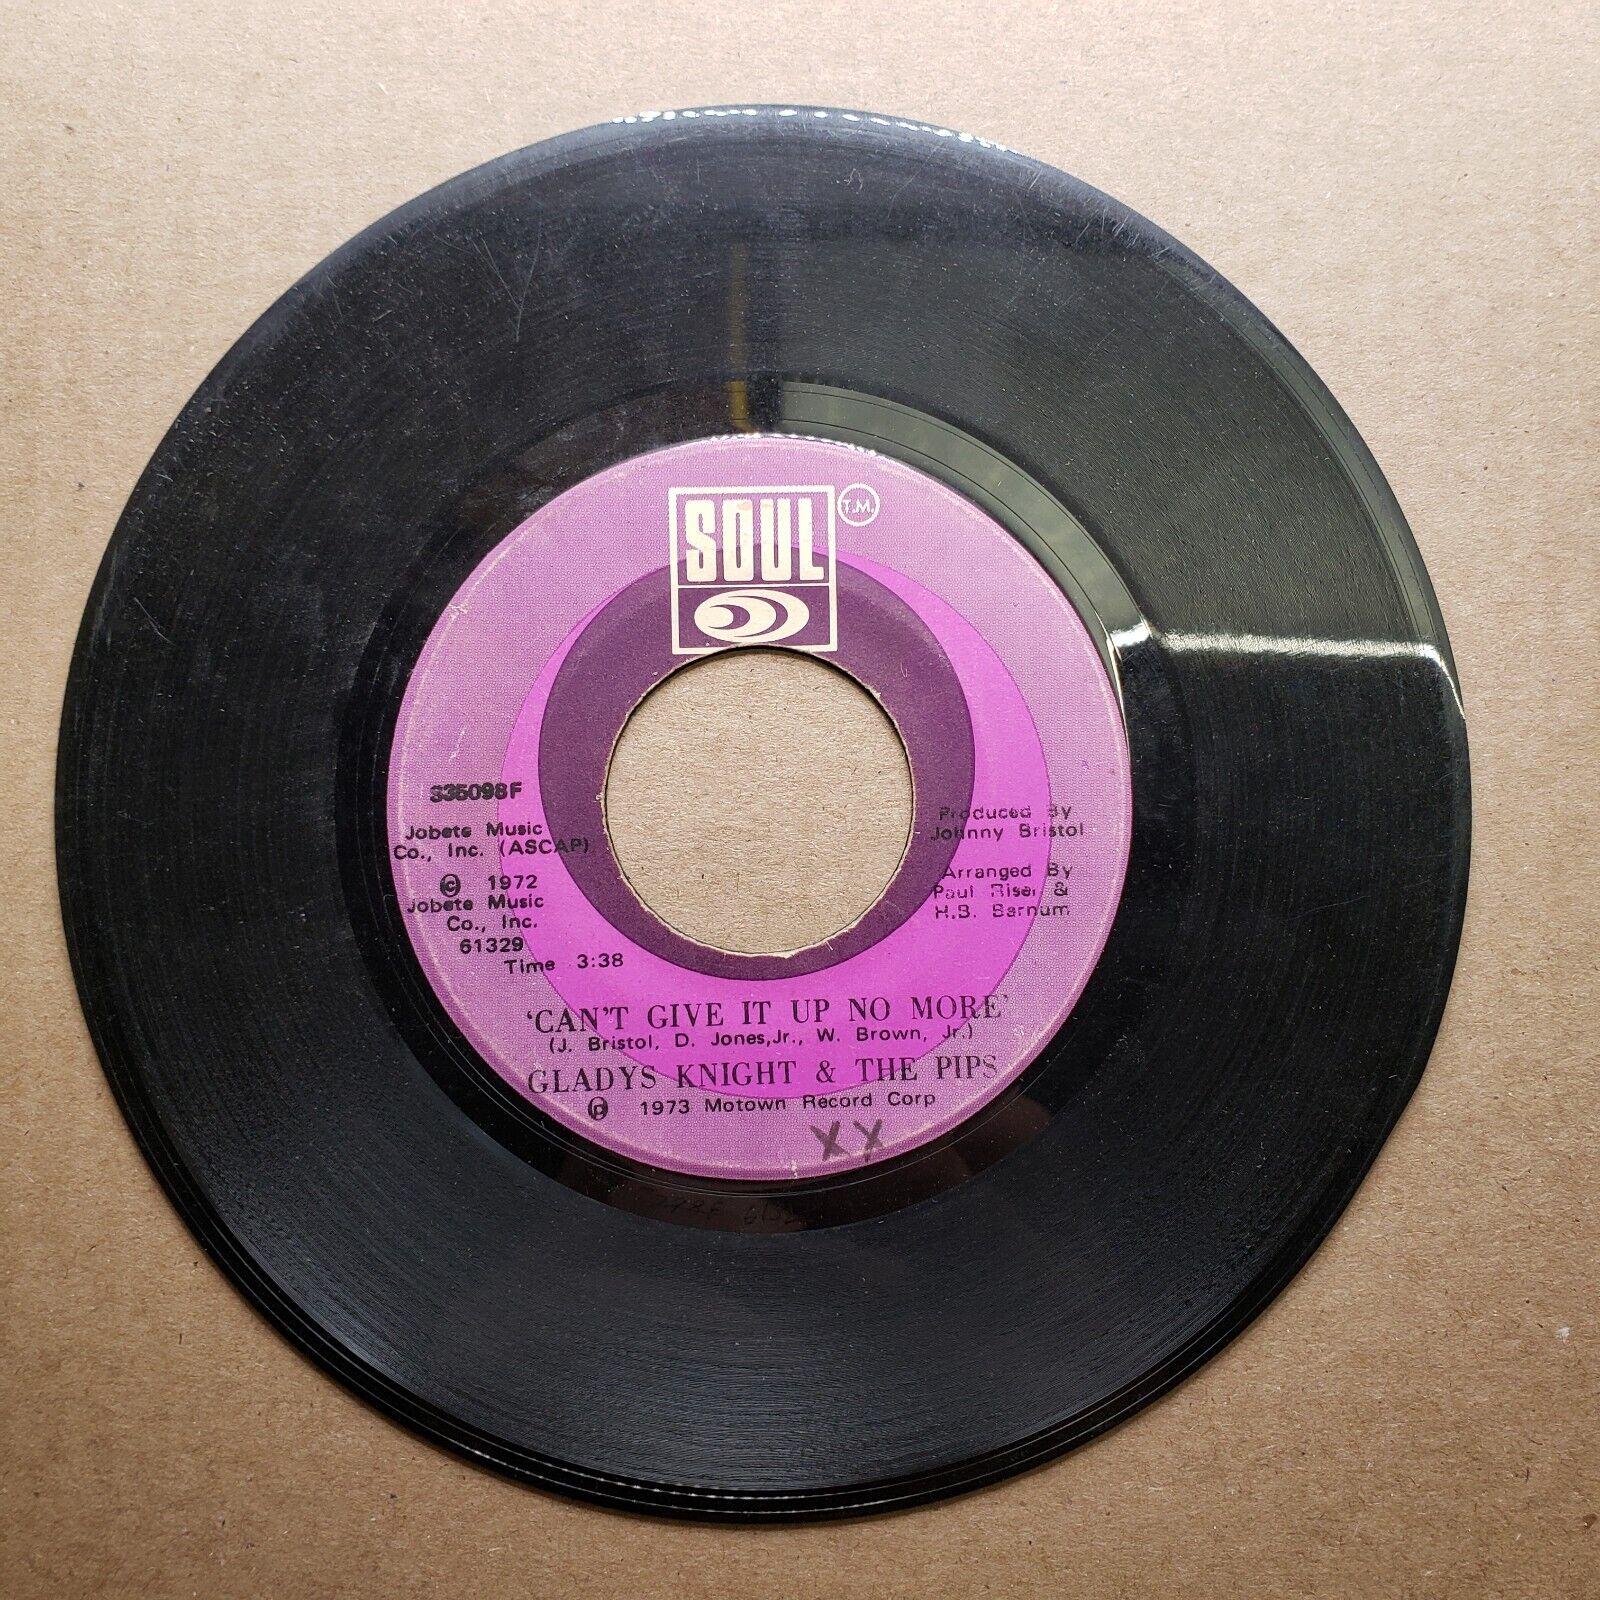 Gladys Knight & The Pips - Neither One Of Us; Can't Give It Up No More -  45 RPM